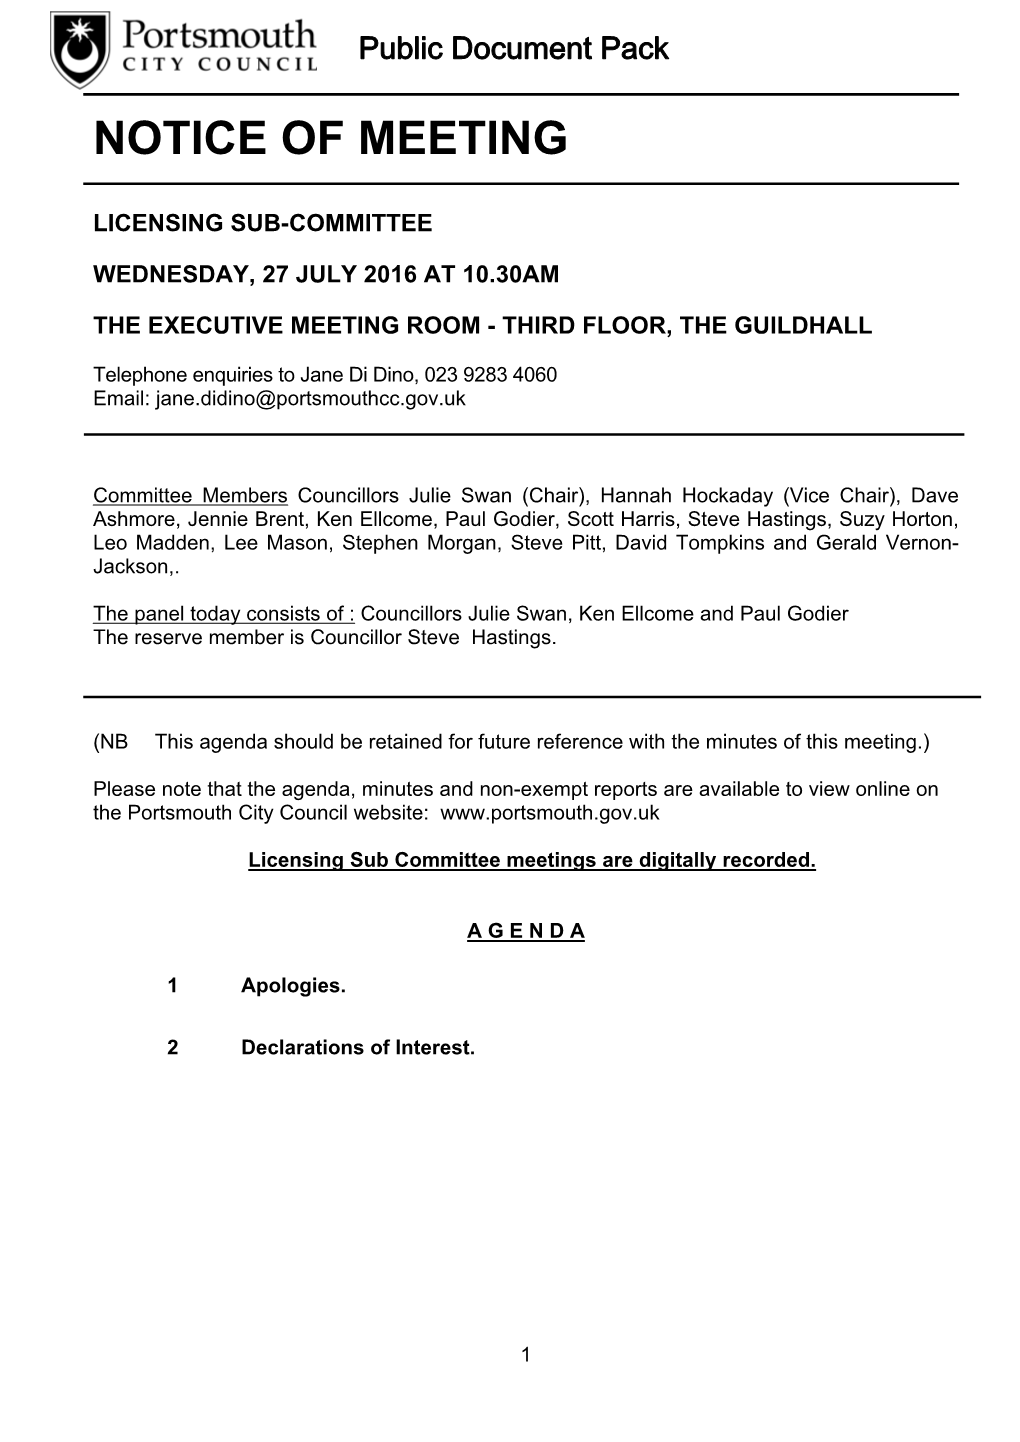 (Public Pack)Agenda Document for Licensing Sub-Committee, 27/07/2016 10:30